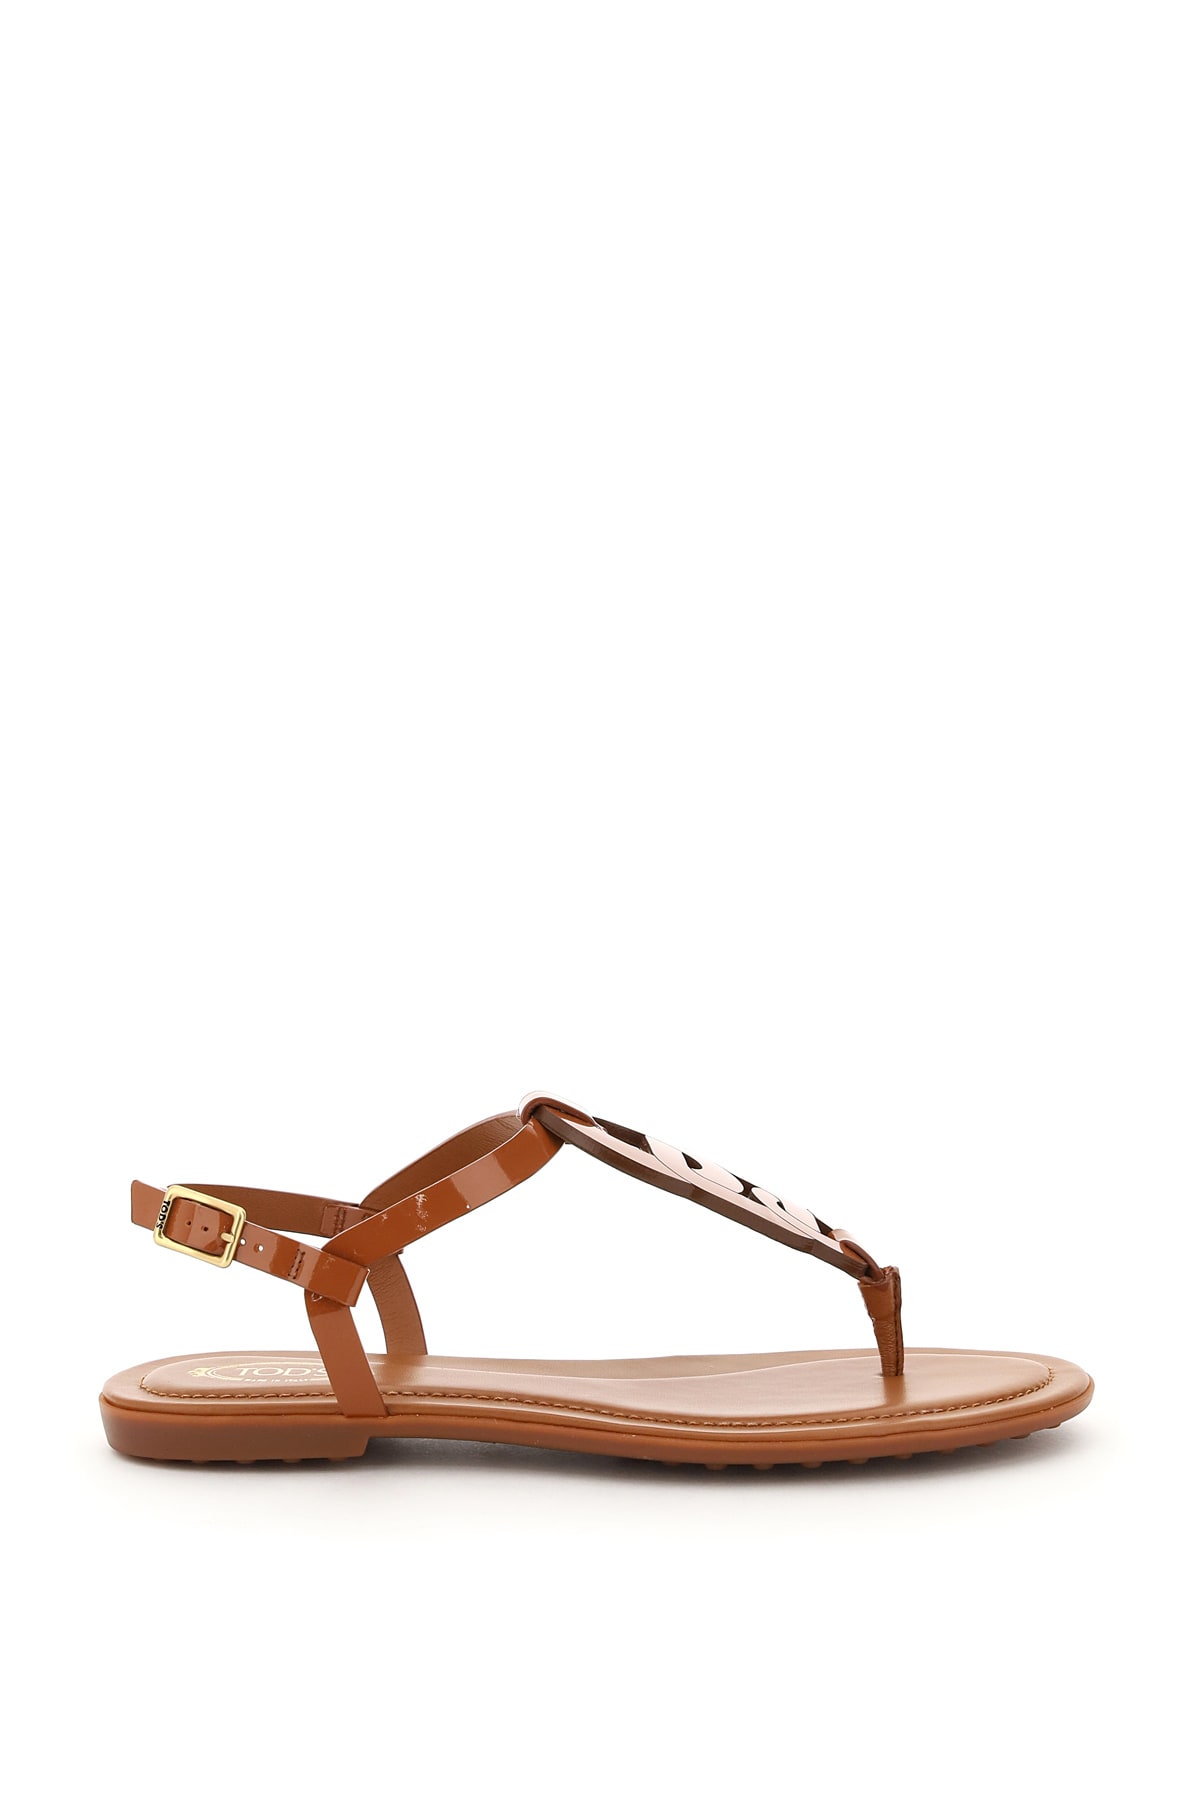 Buy Tods Chain Thong Sandals online, shop Tods shoes with free shipping